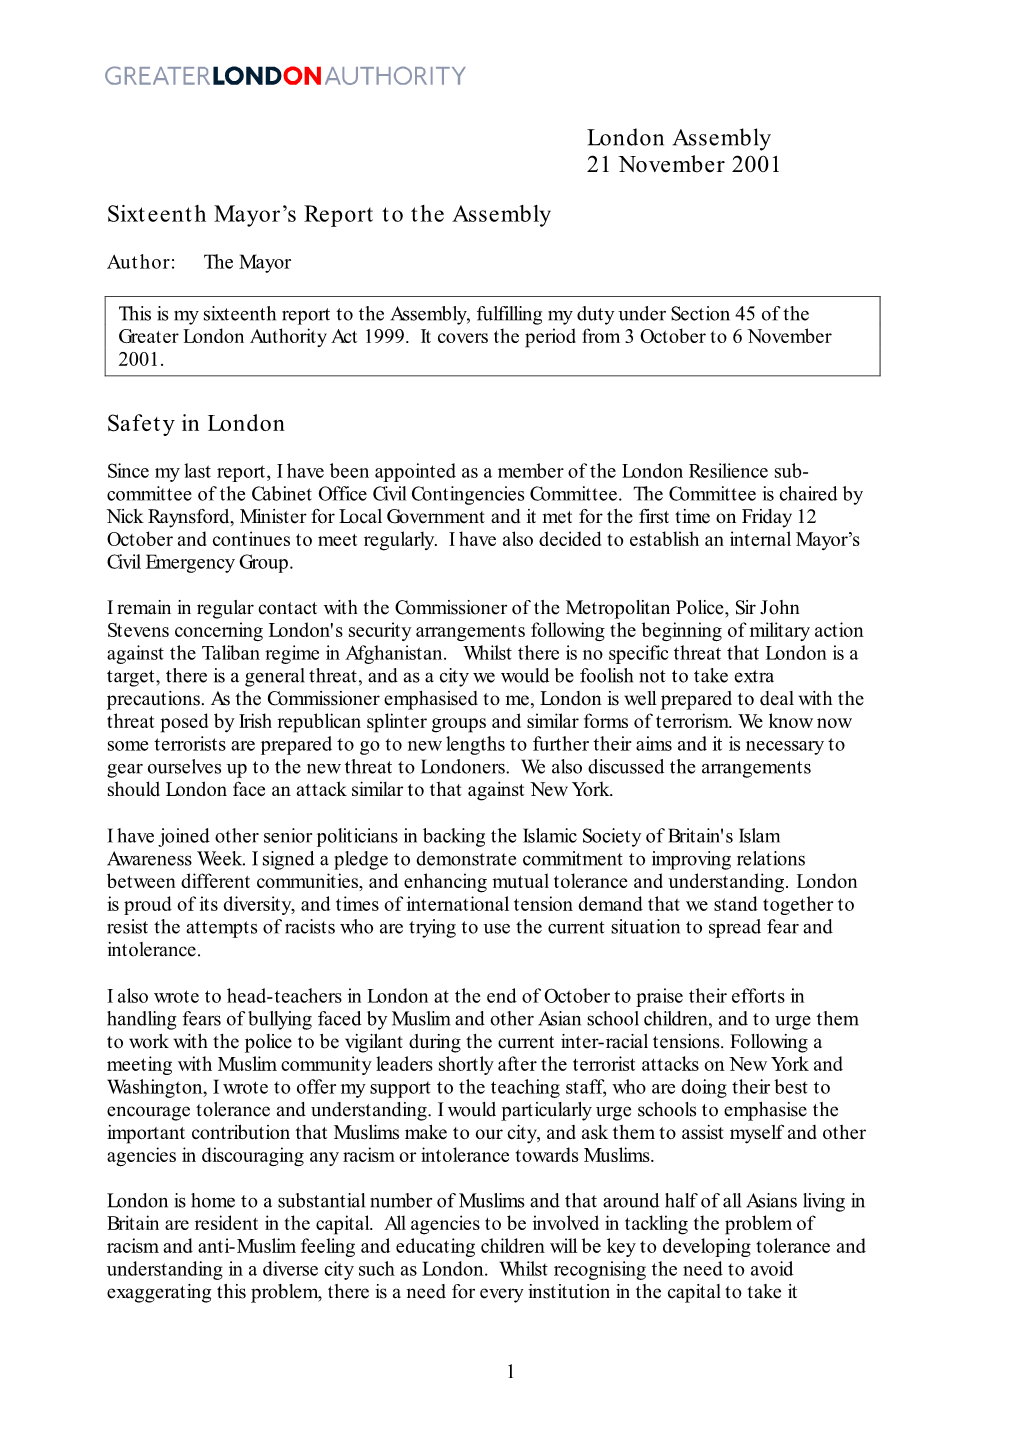 London Assembly 21 November 2001 Sixteenth Mayor's Report to The